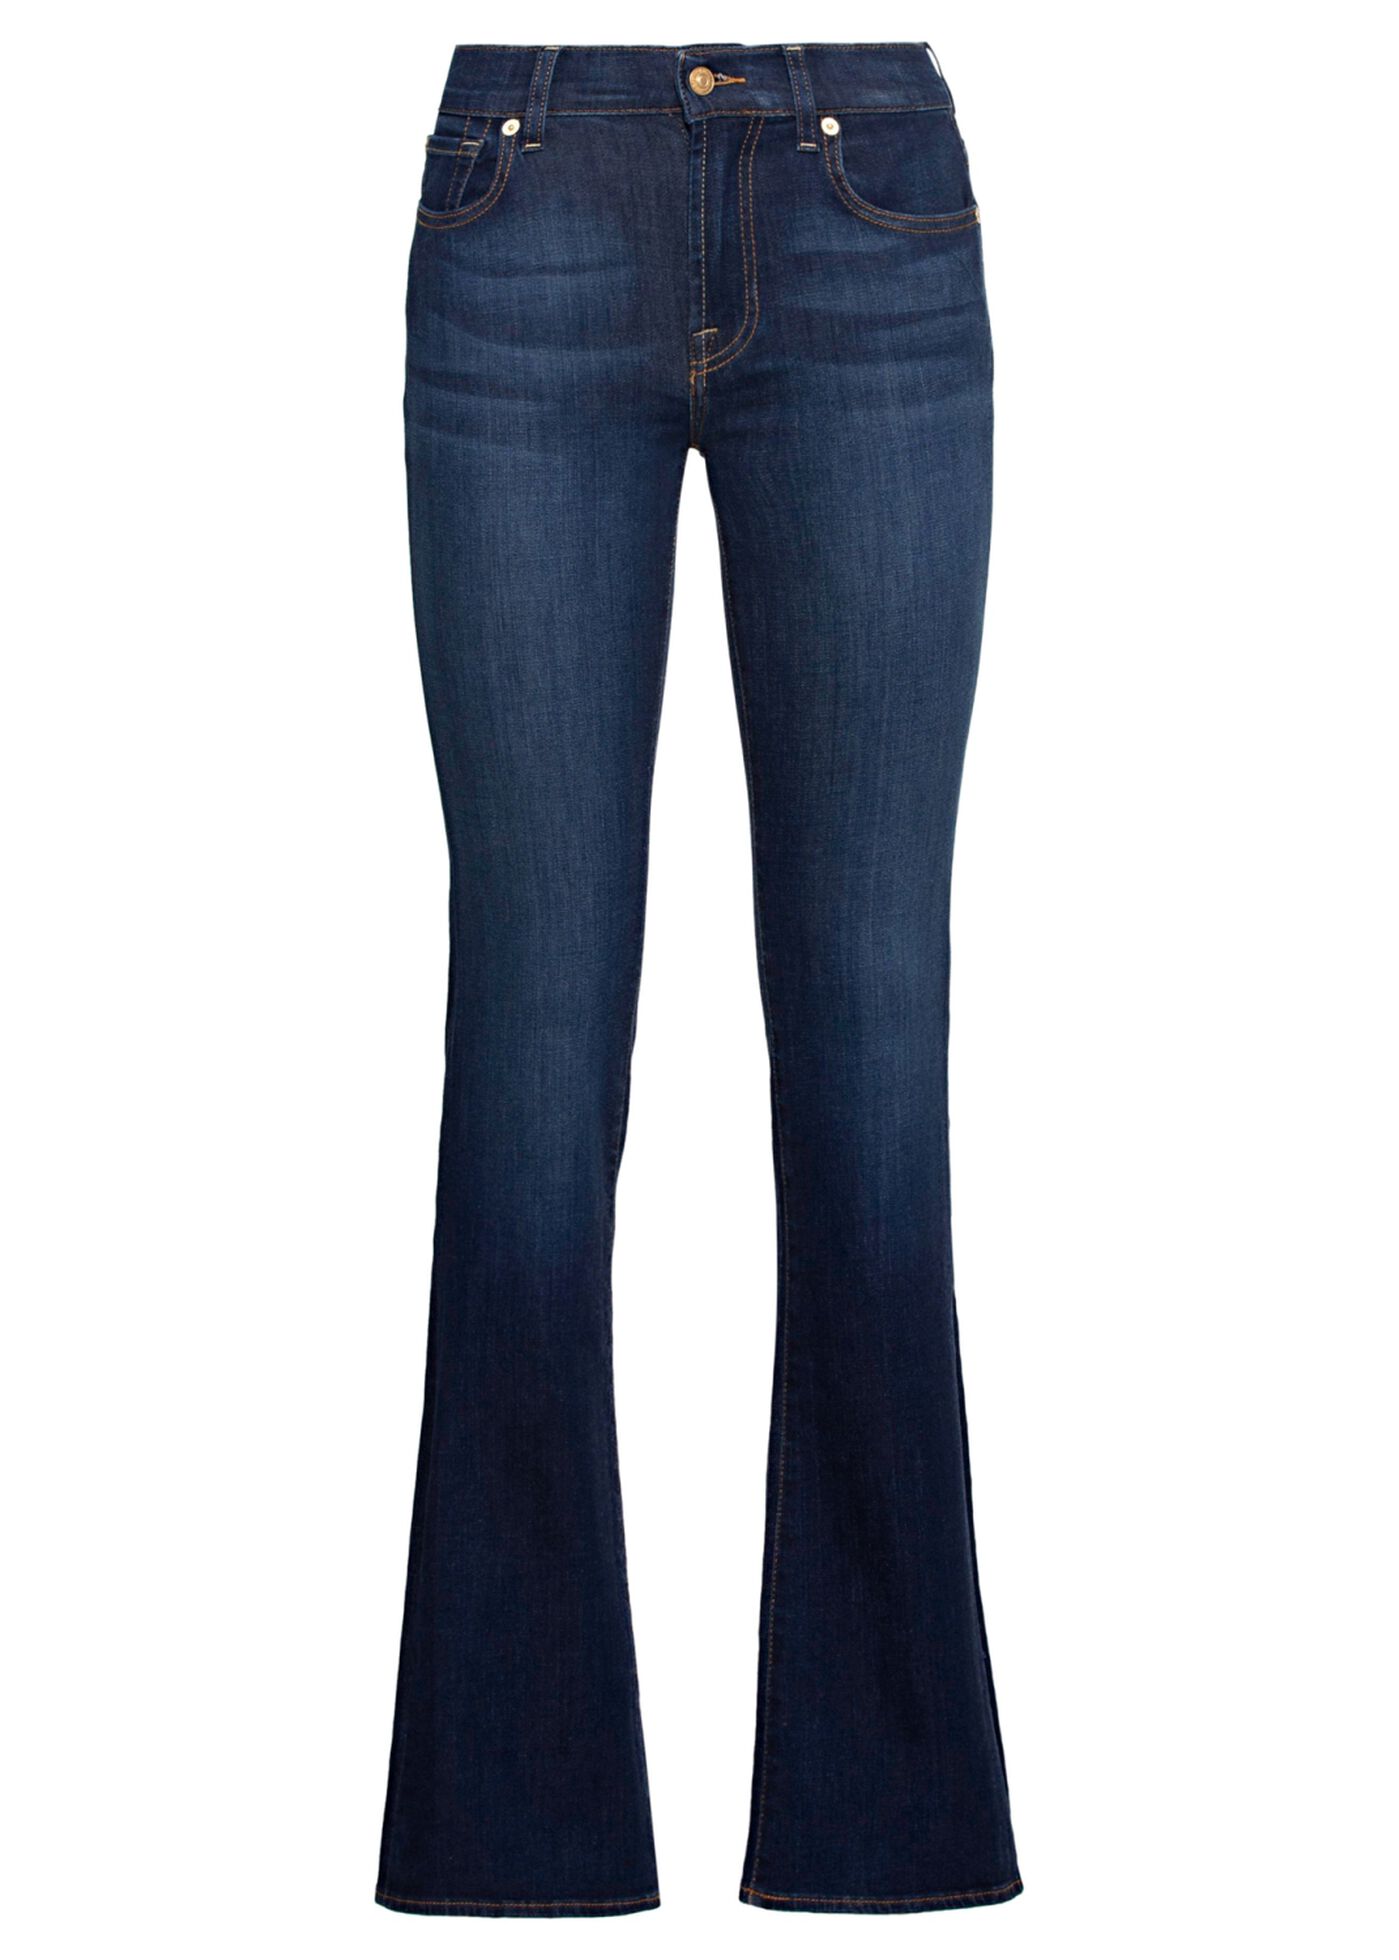 7 for all mankind - Bootcut Jeans